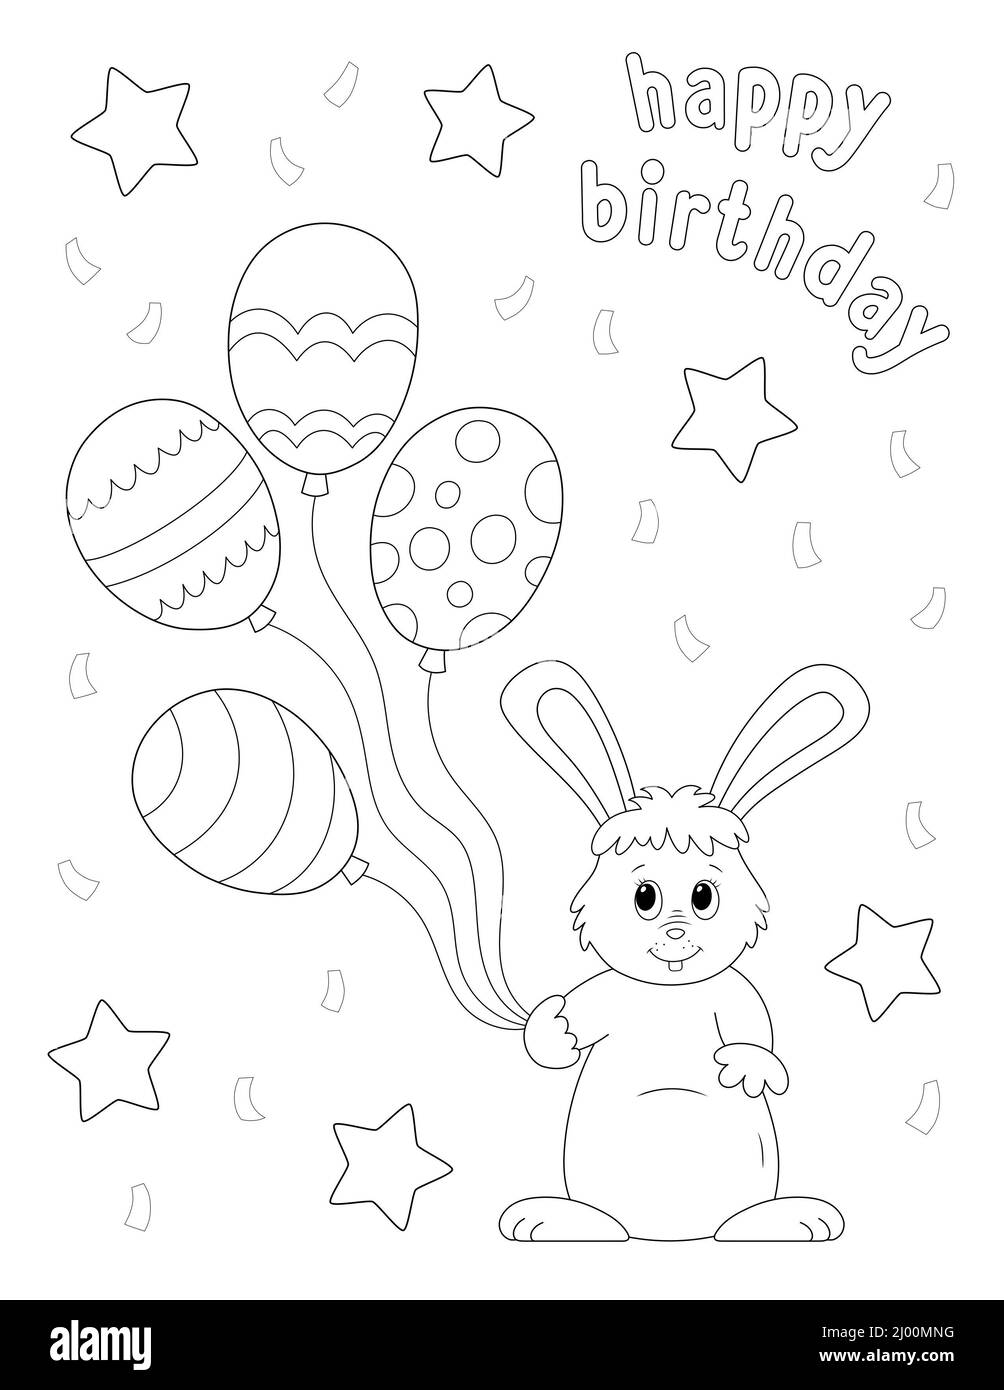 happy birthday coloring page with a cute rabbit holding balloons. vertical orientation Stock Photo